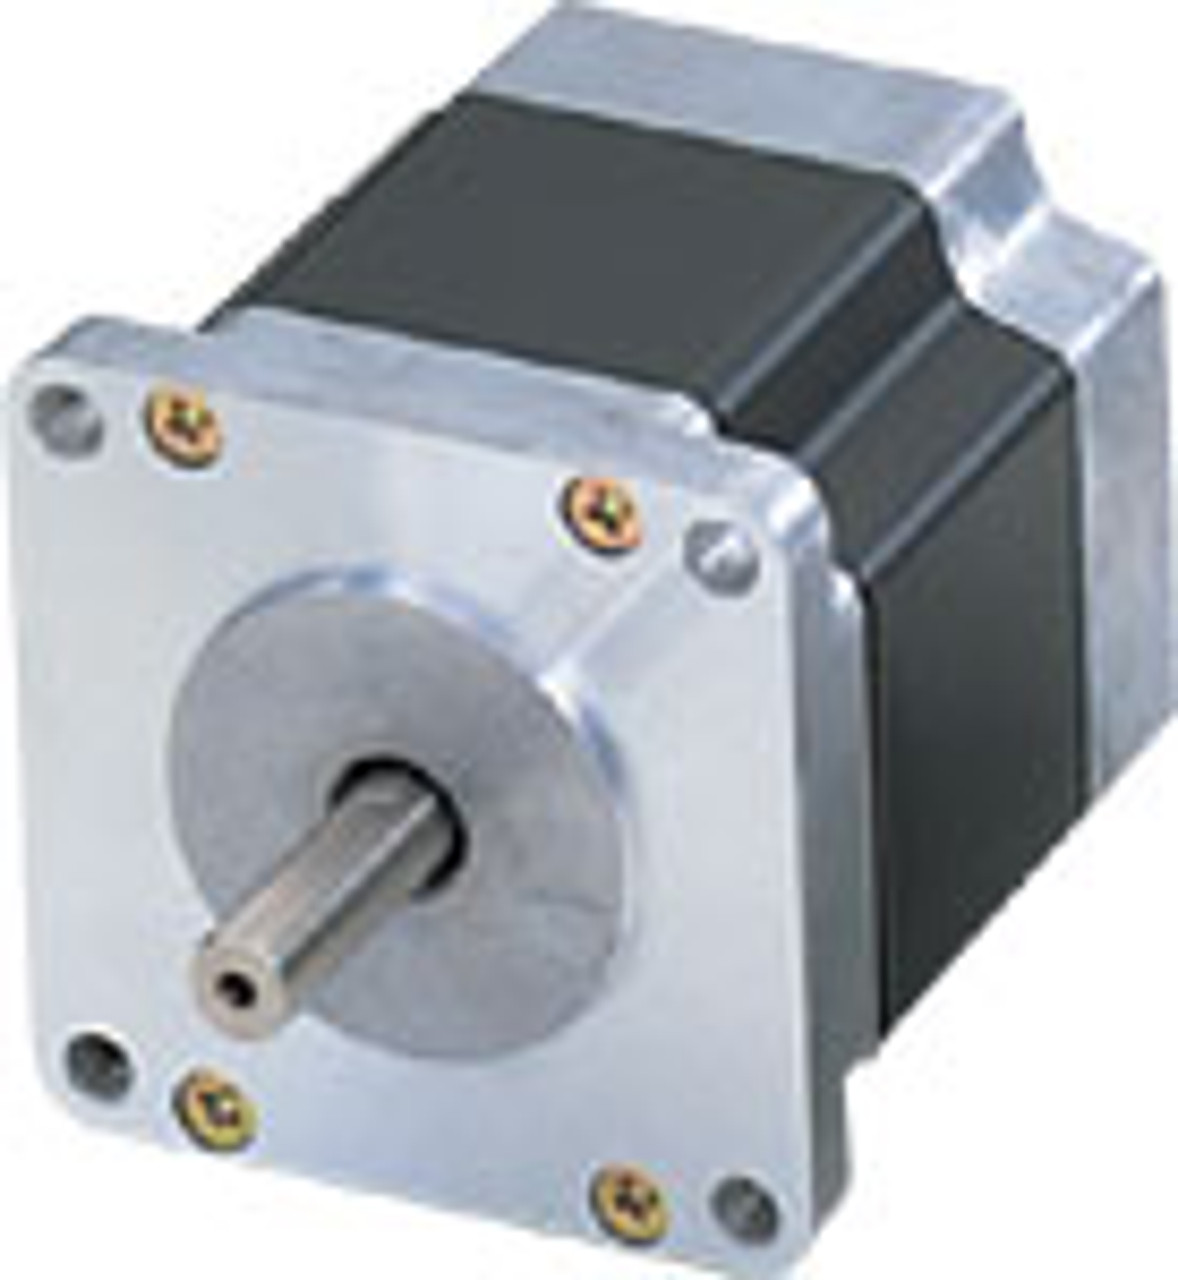 PKP566FN24BW - Product Image